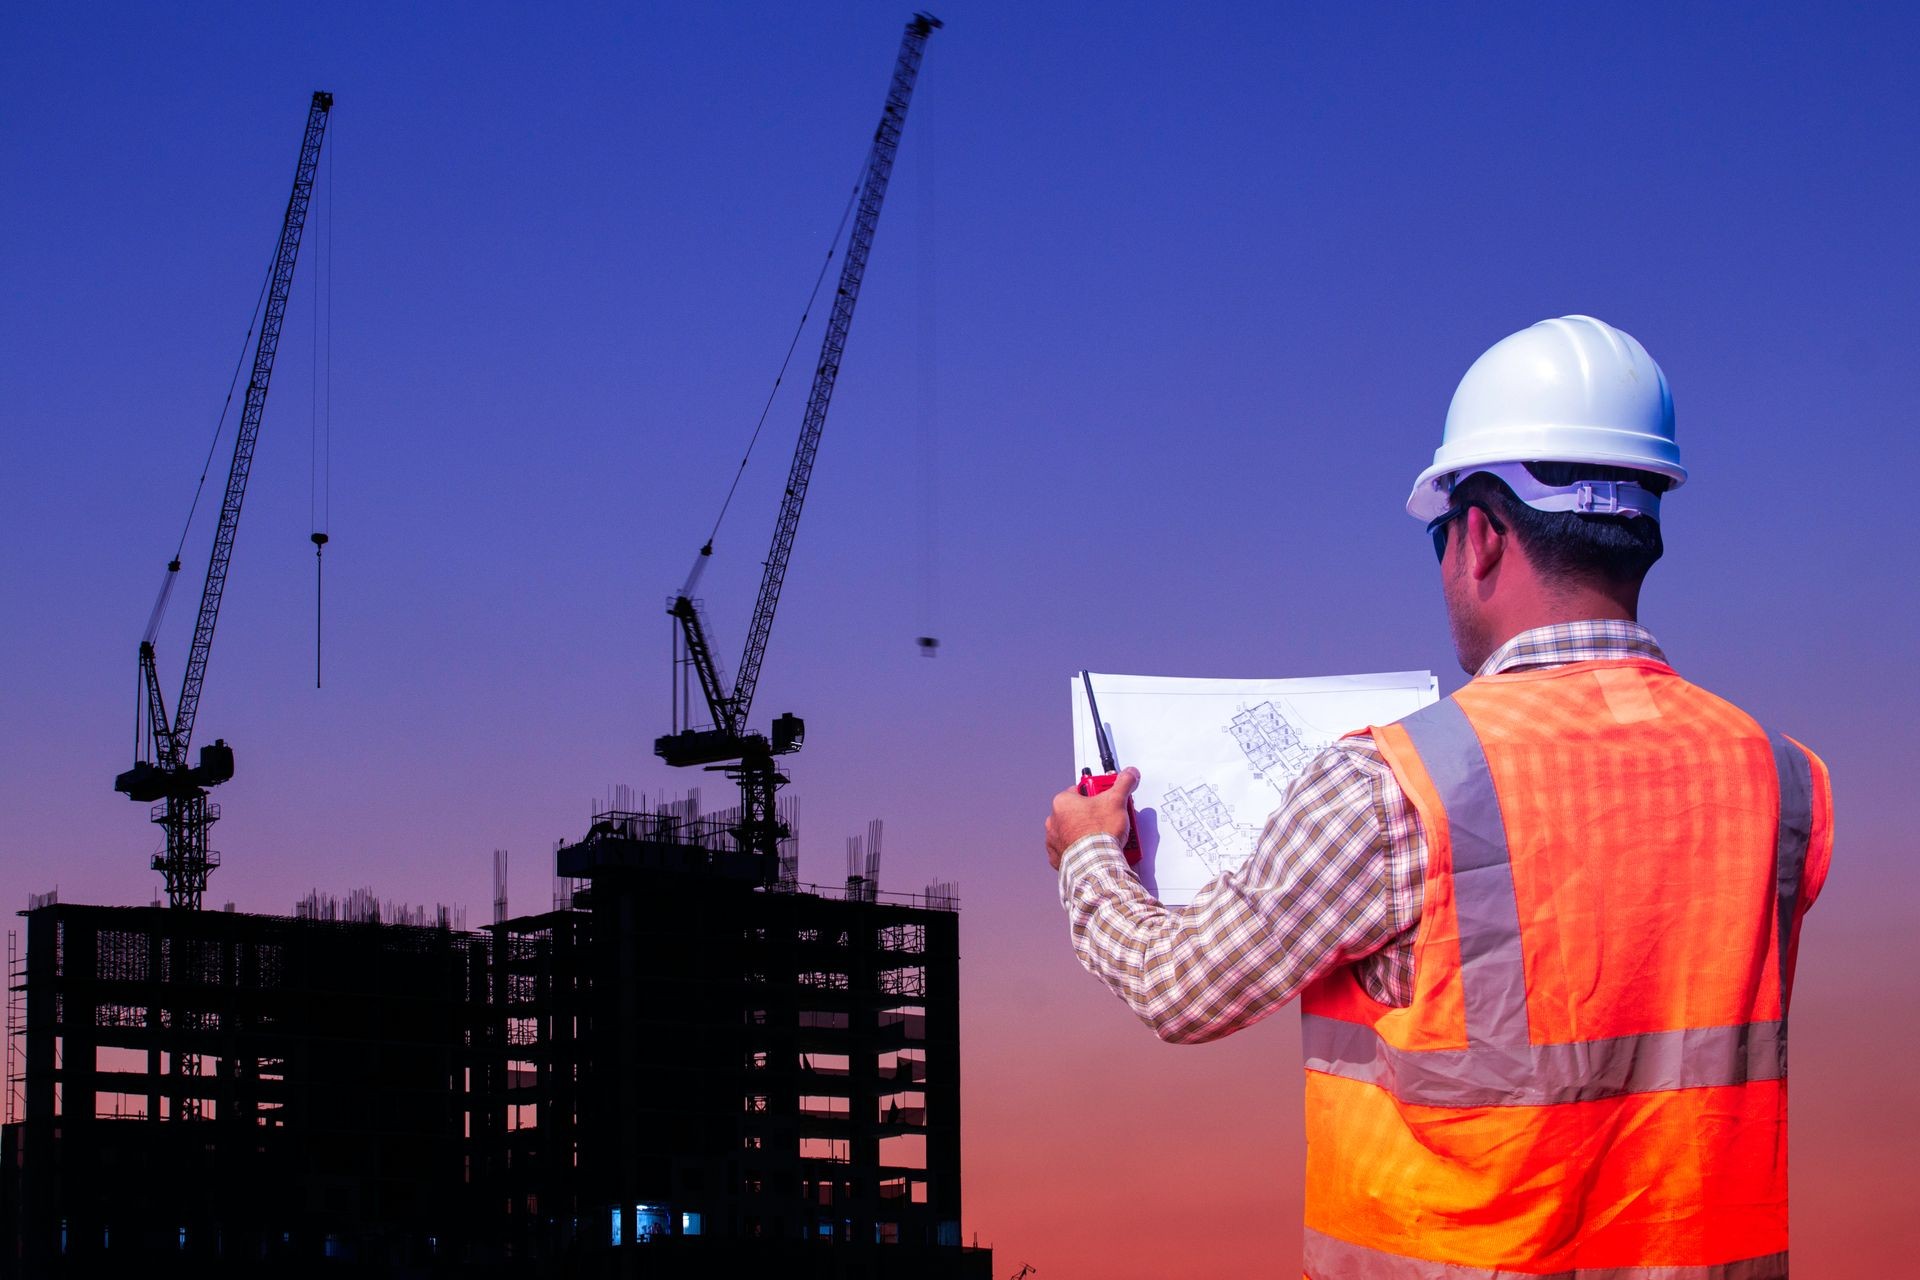 Engineer with blue print for control working at large building construction site in sunset